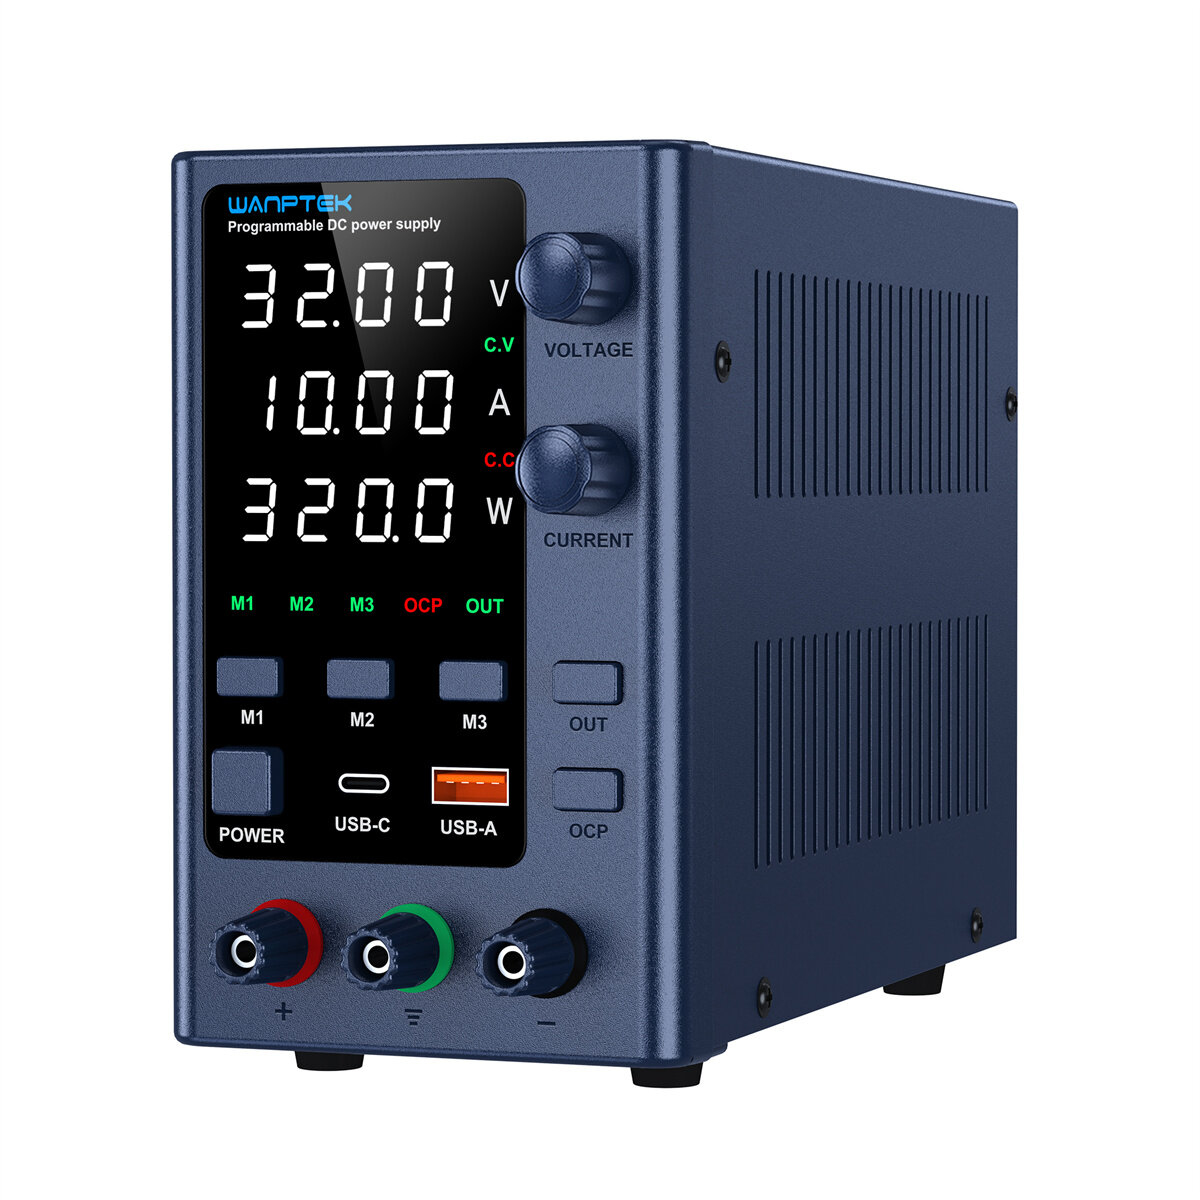 WANPTEK Regulated Power Supply with 0-160V Voltage 0-10A Current Multi-Function Protection Superior Stability Digital Display ideal for Diverse Electronics Application EPS3205/EPS3210/EPS6205/EPS1203/EPS1602